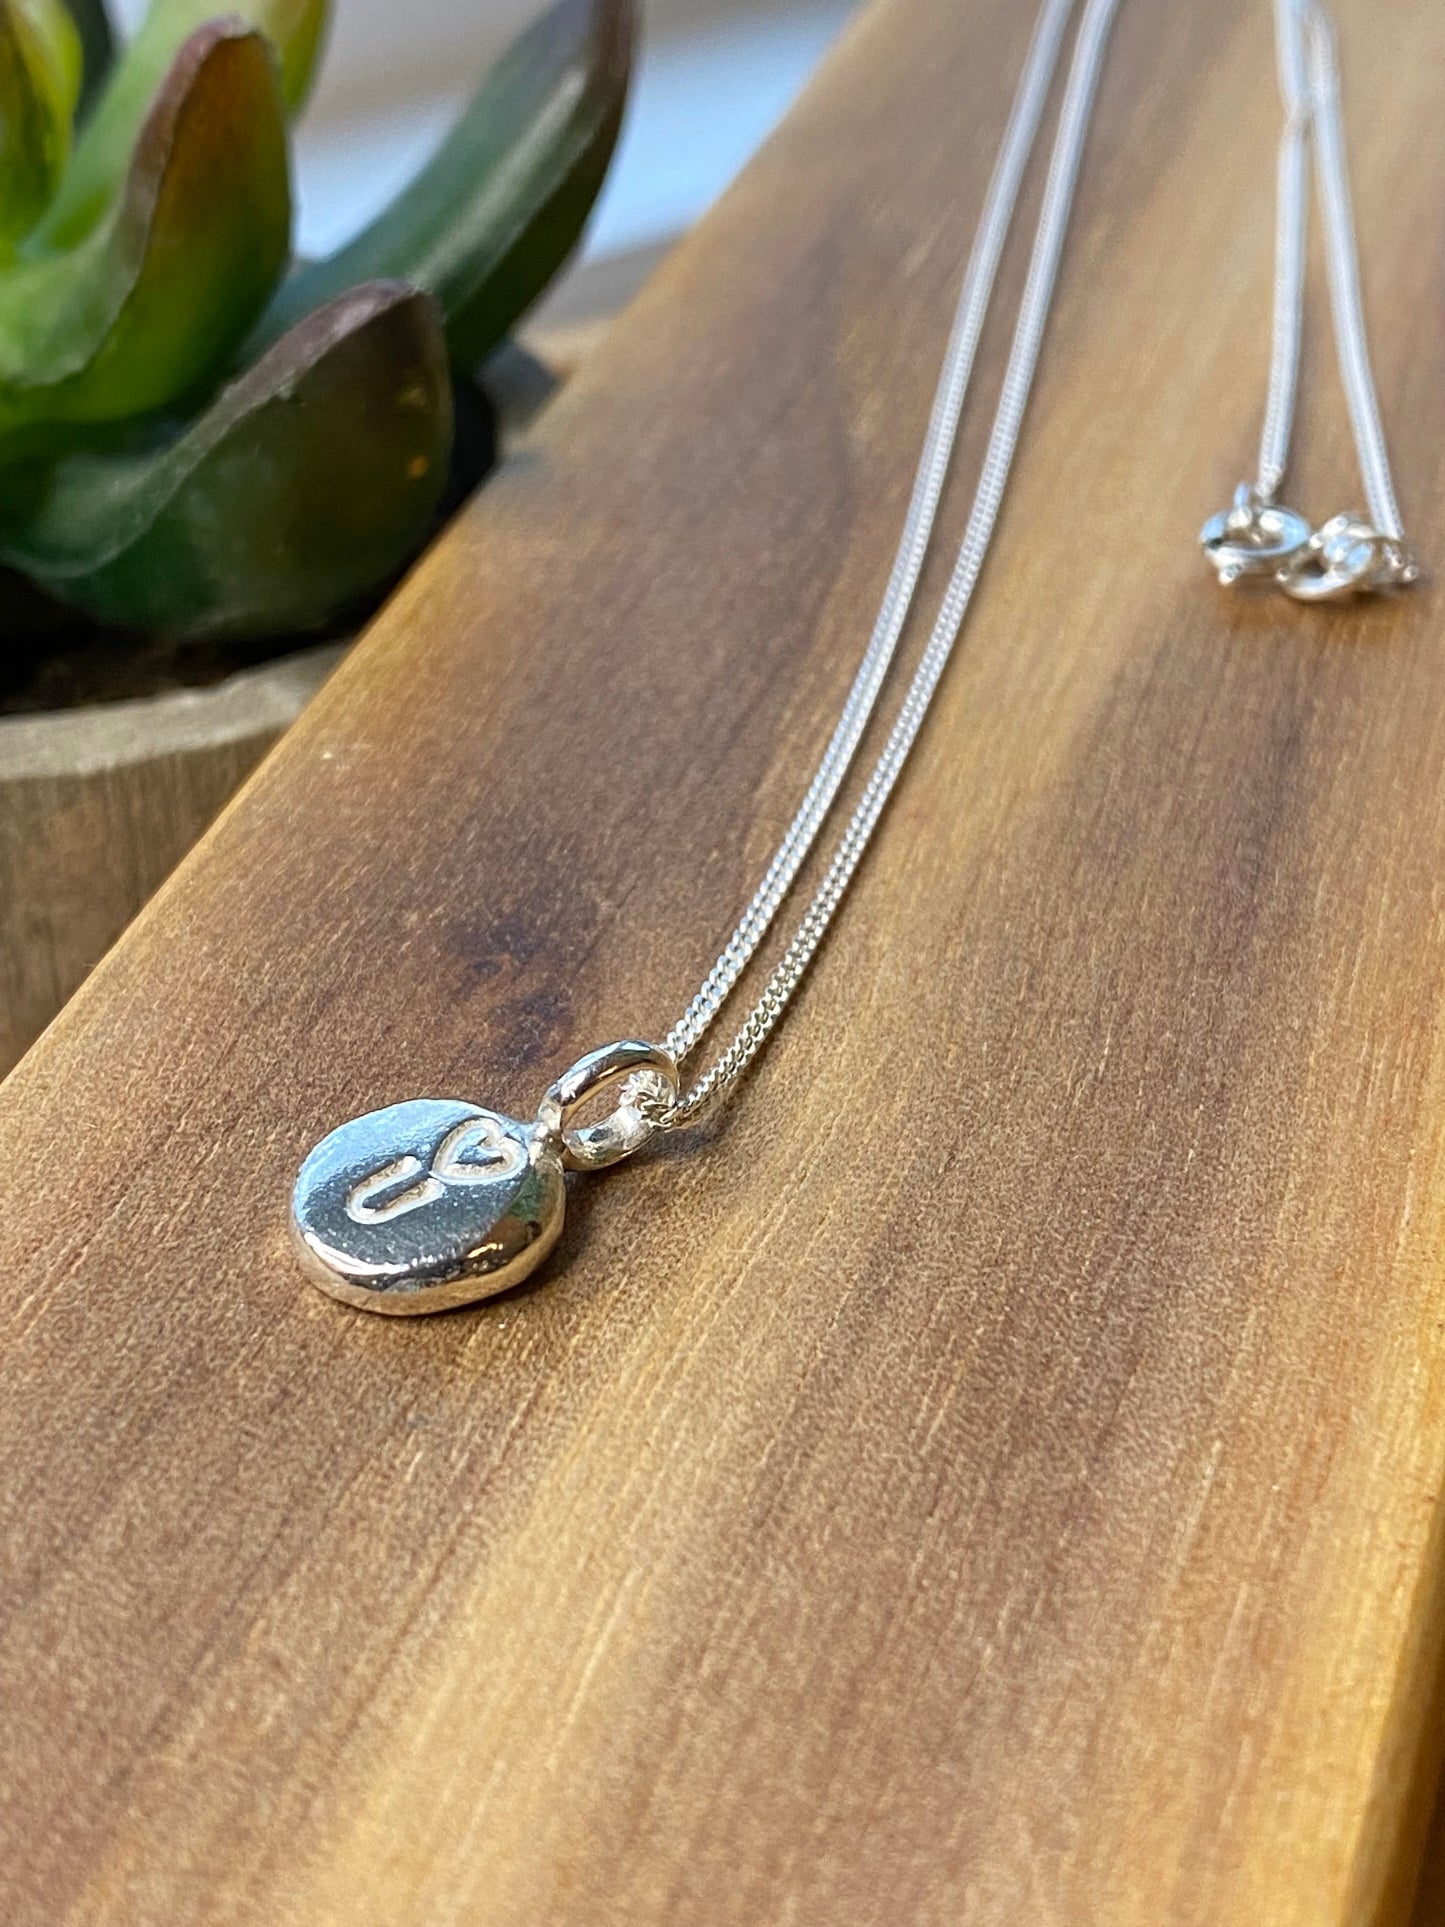 Necklace - 16” Sterling Silver Heart U Pendant on a Sterling Silver Chain